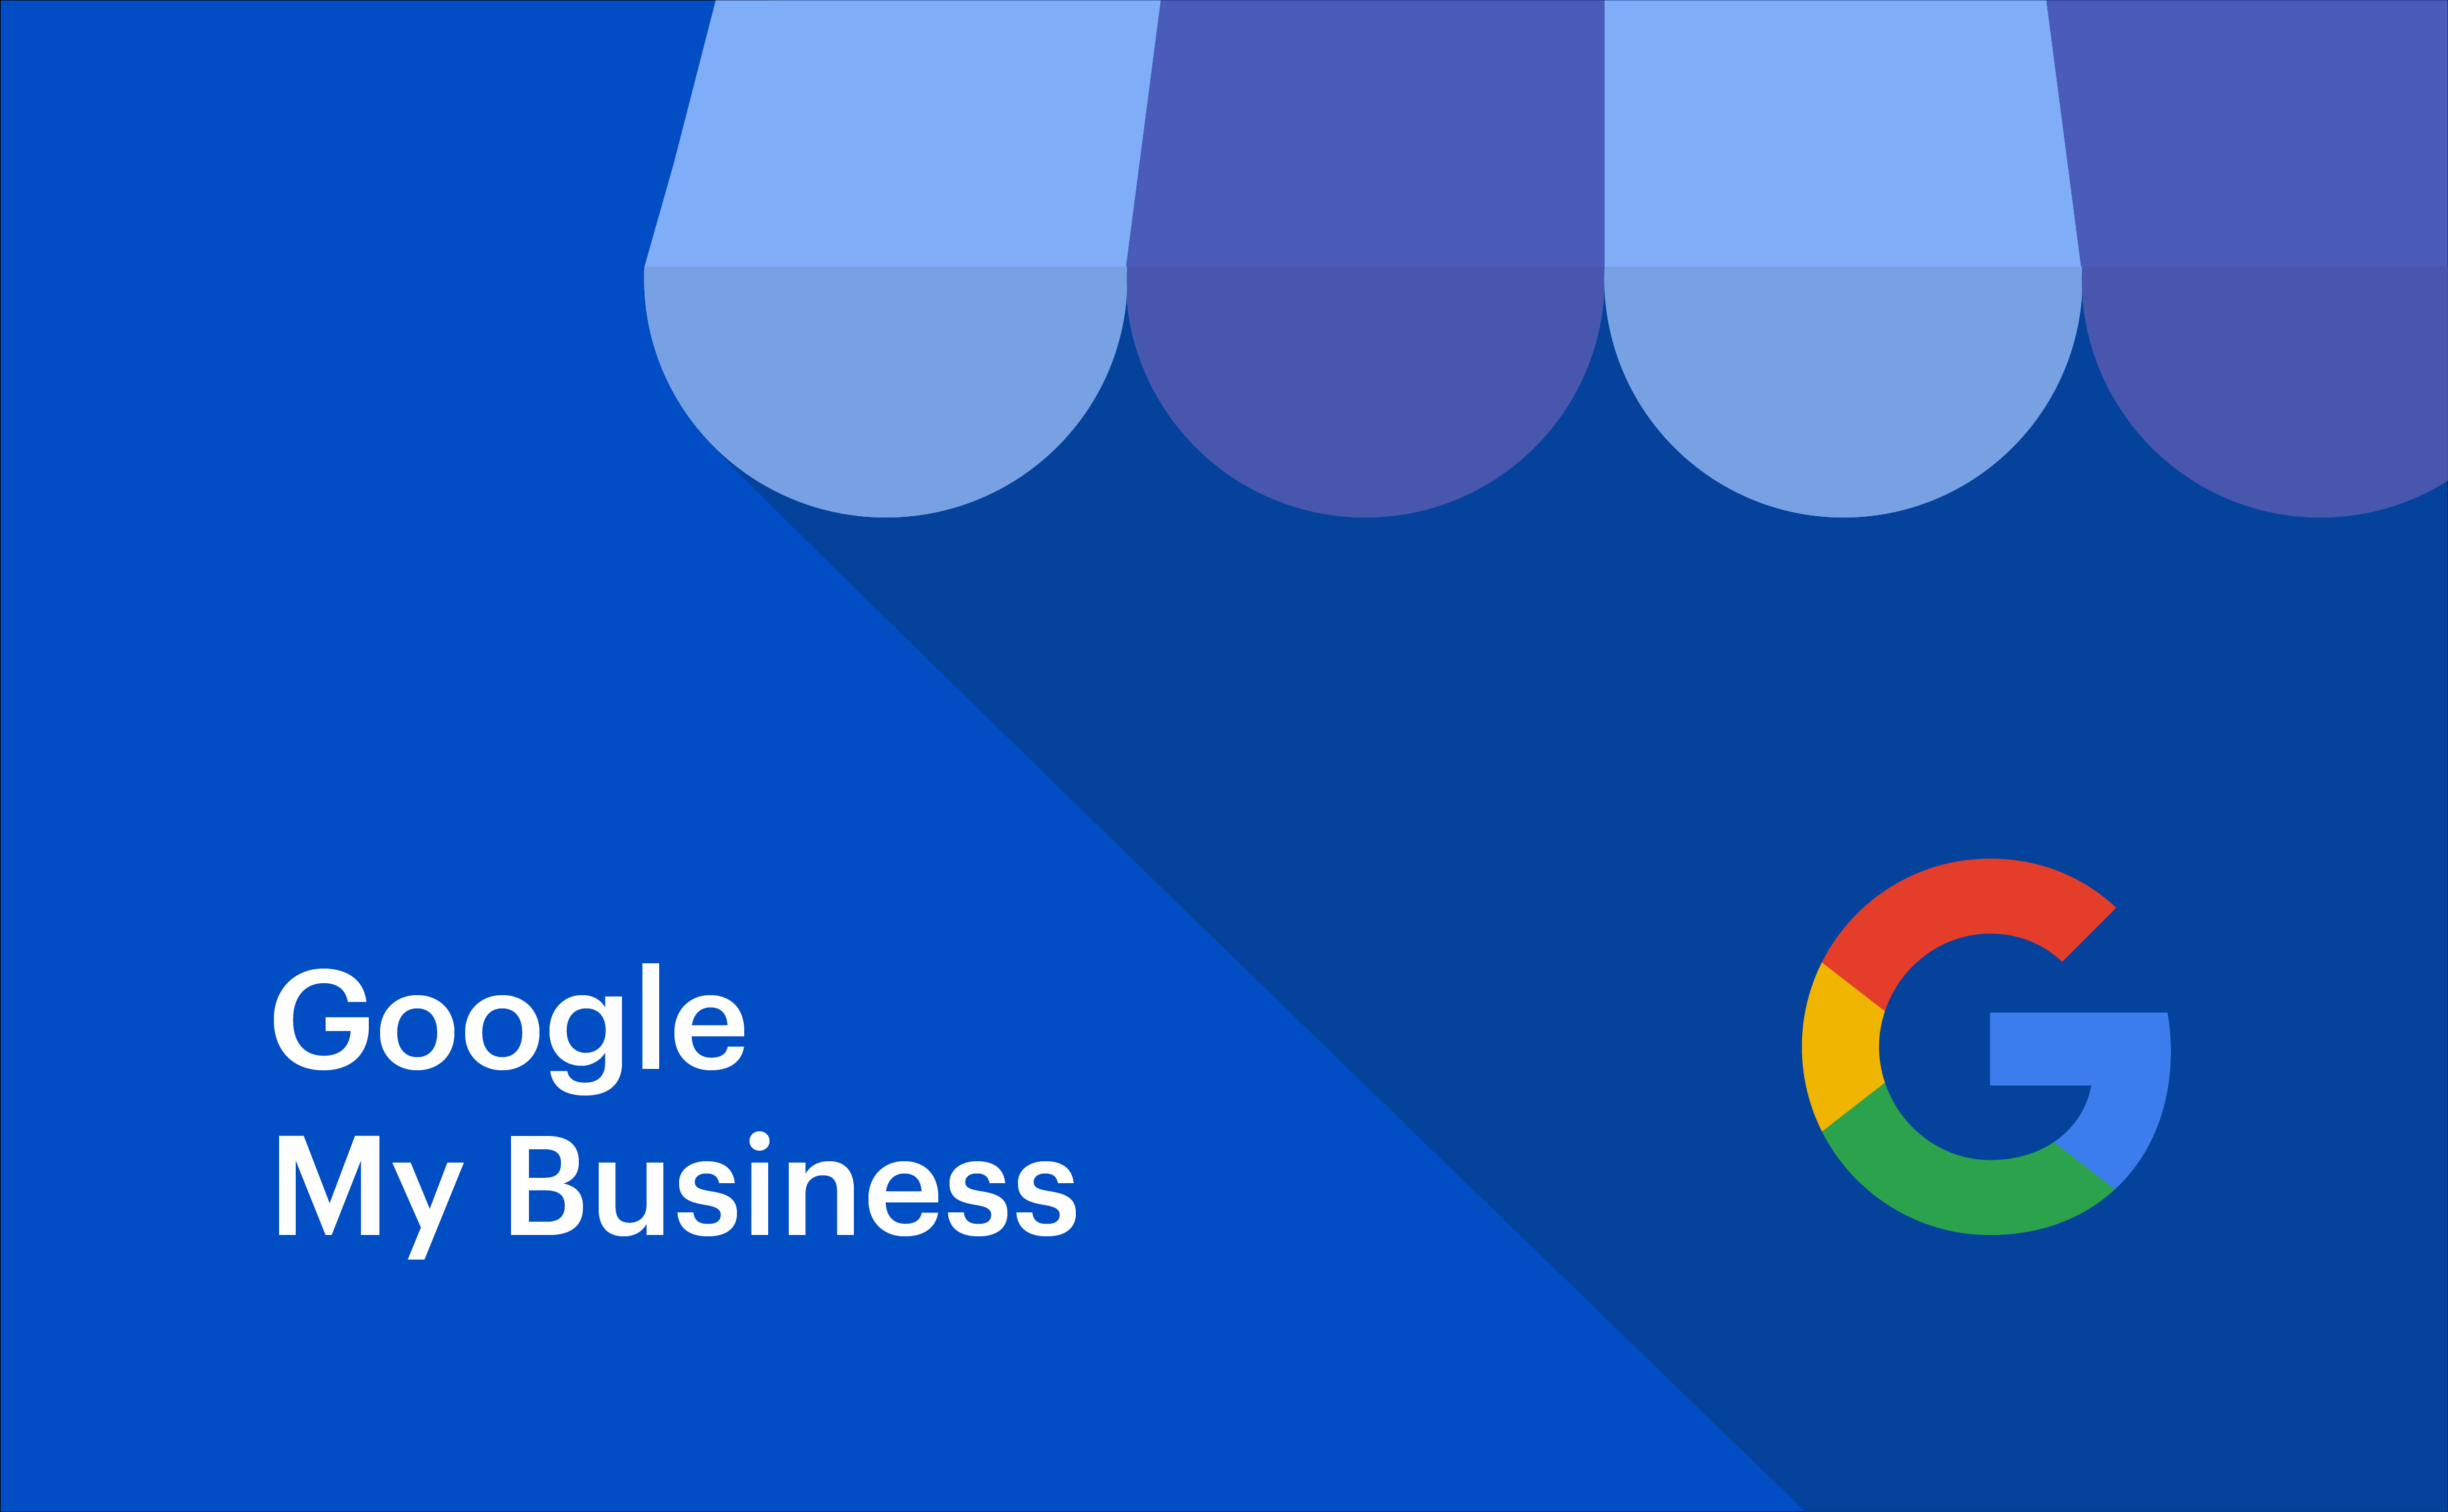 Wondering how does Google My Business help SEO? This blog will tell you everything you need to know about GMB and its benefits for SEO.